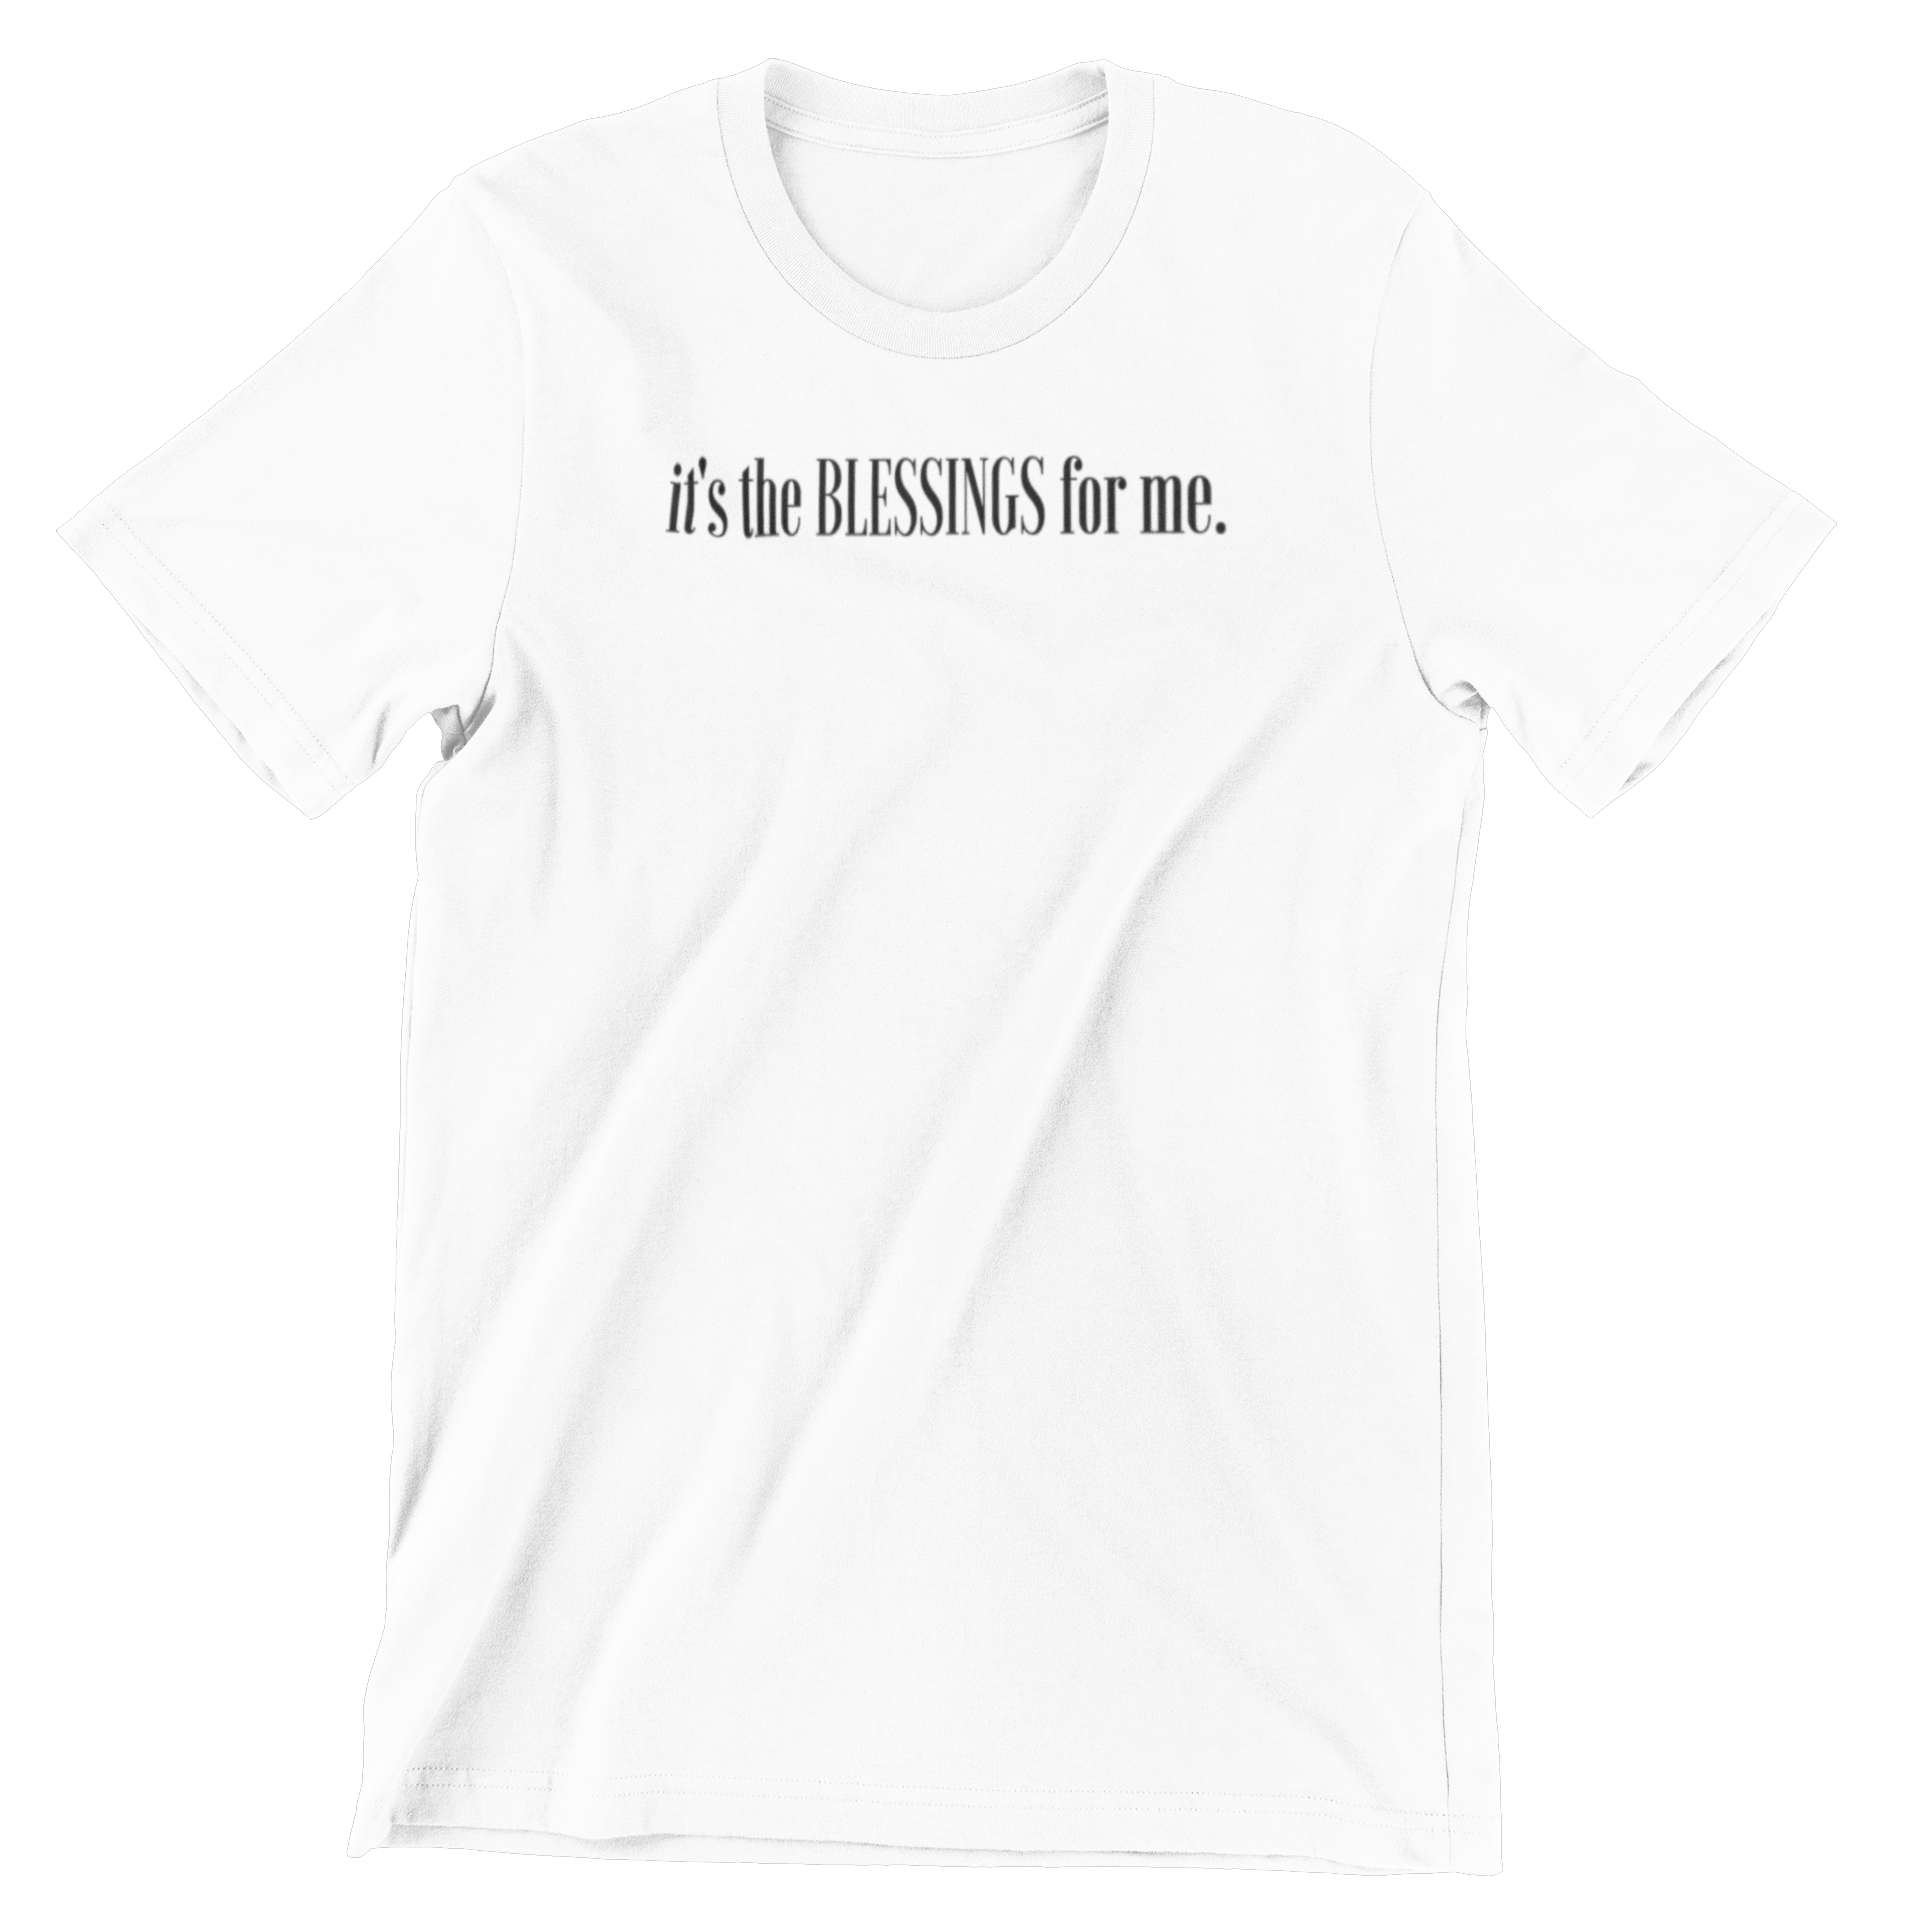 IT'S THE BLESSNGS FOR ME T-SHIRT- WHITE